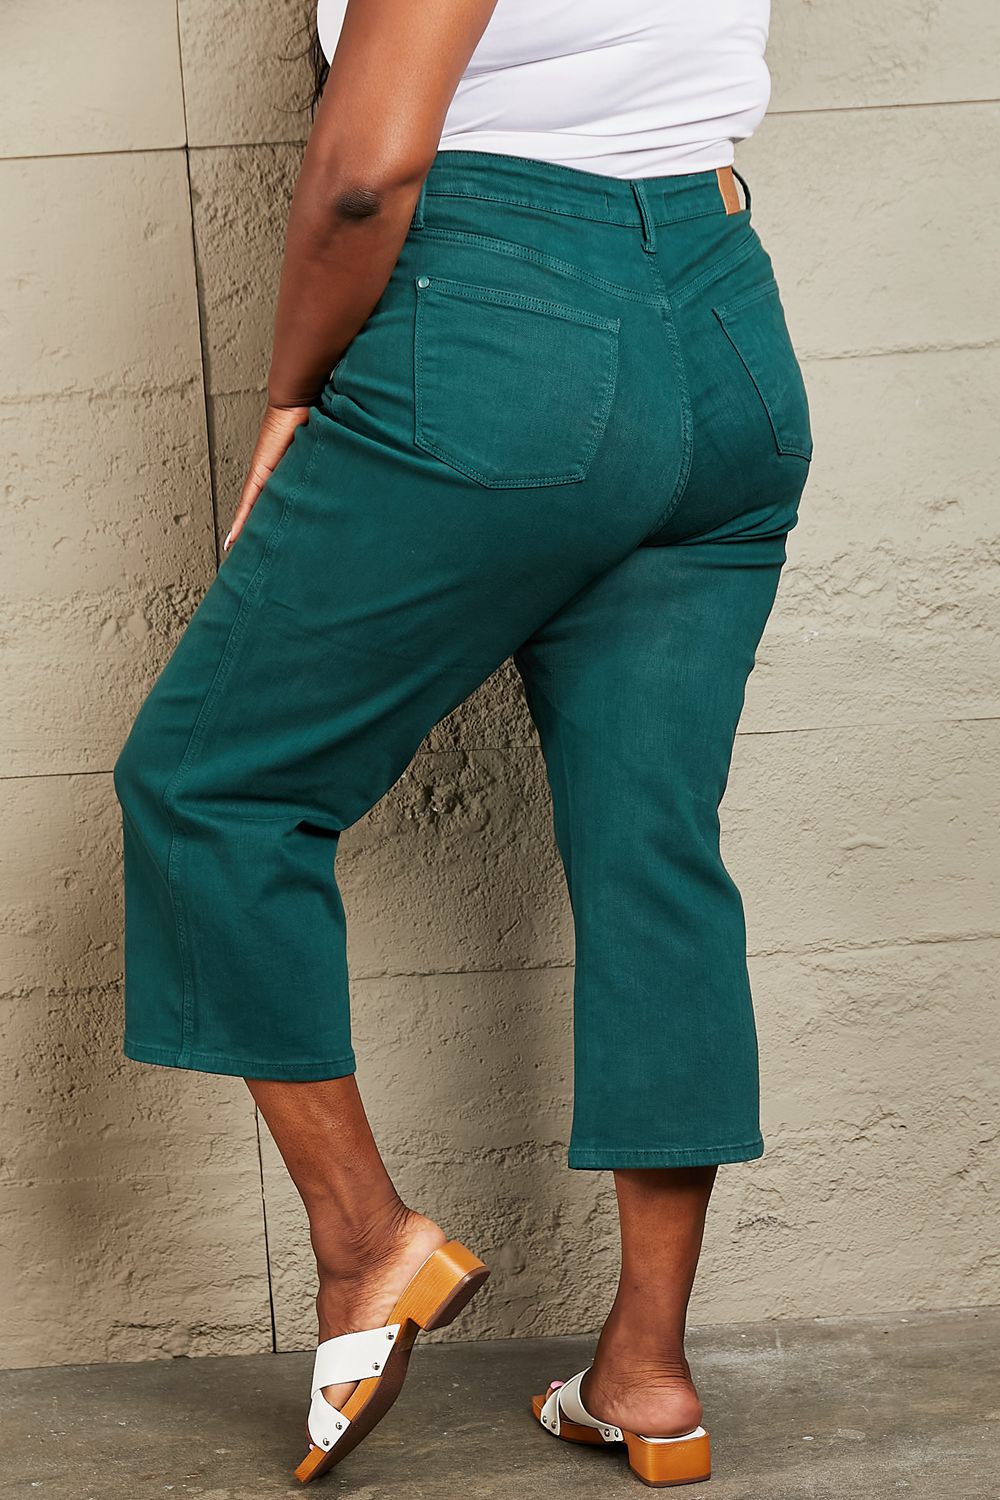 Camile Tummy Control High Waisted Cropped Wide Leg Jeans by Judy blue Teal Tummy Control Jeans by Vim&Vigor | Vim&Vigor Boutique